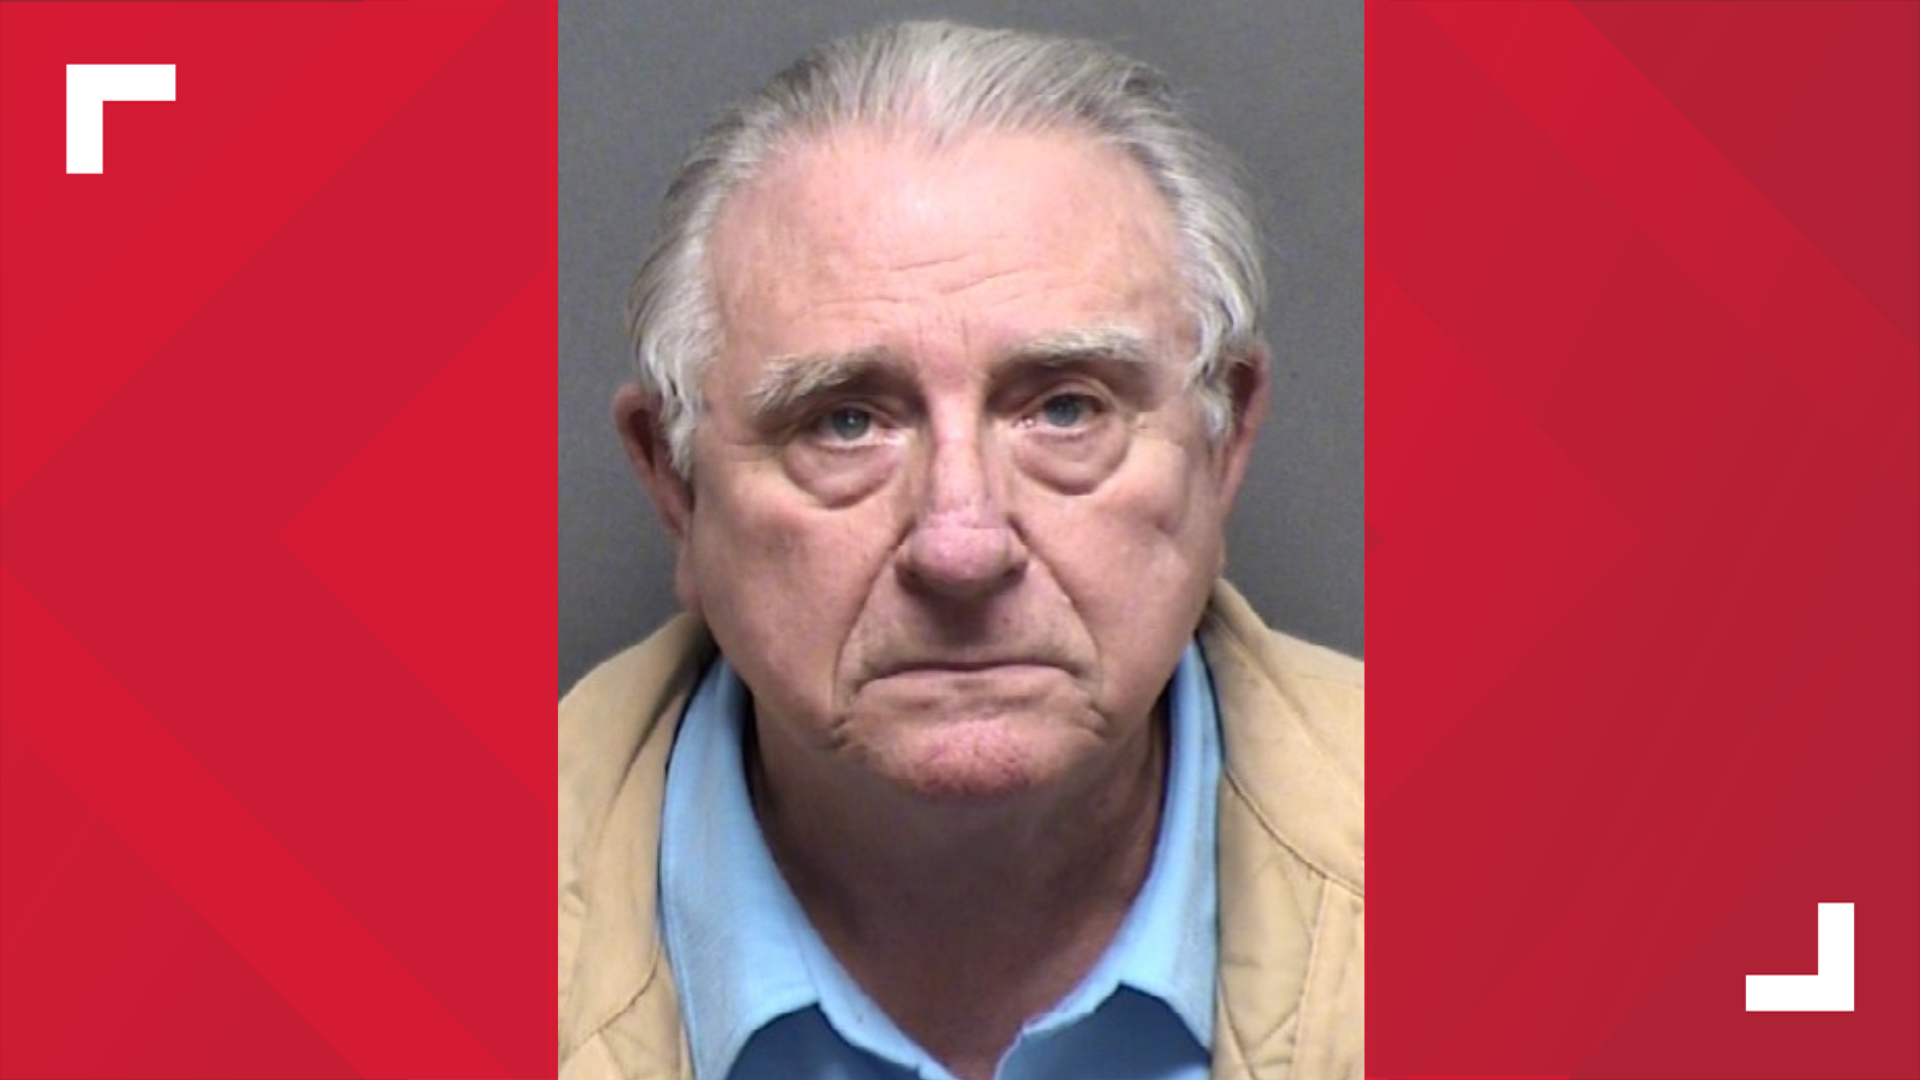 76-year-old man sentenced to 80 years in prison in connection to state, federal child sex charges kens5 picture